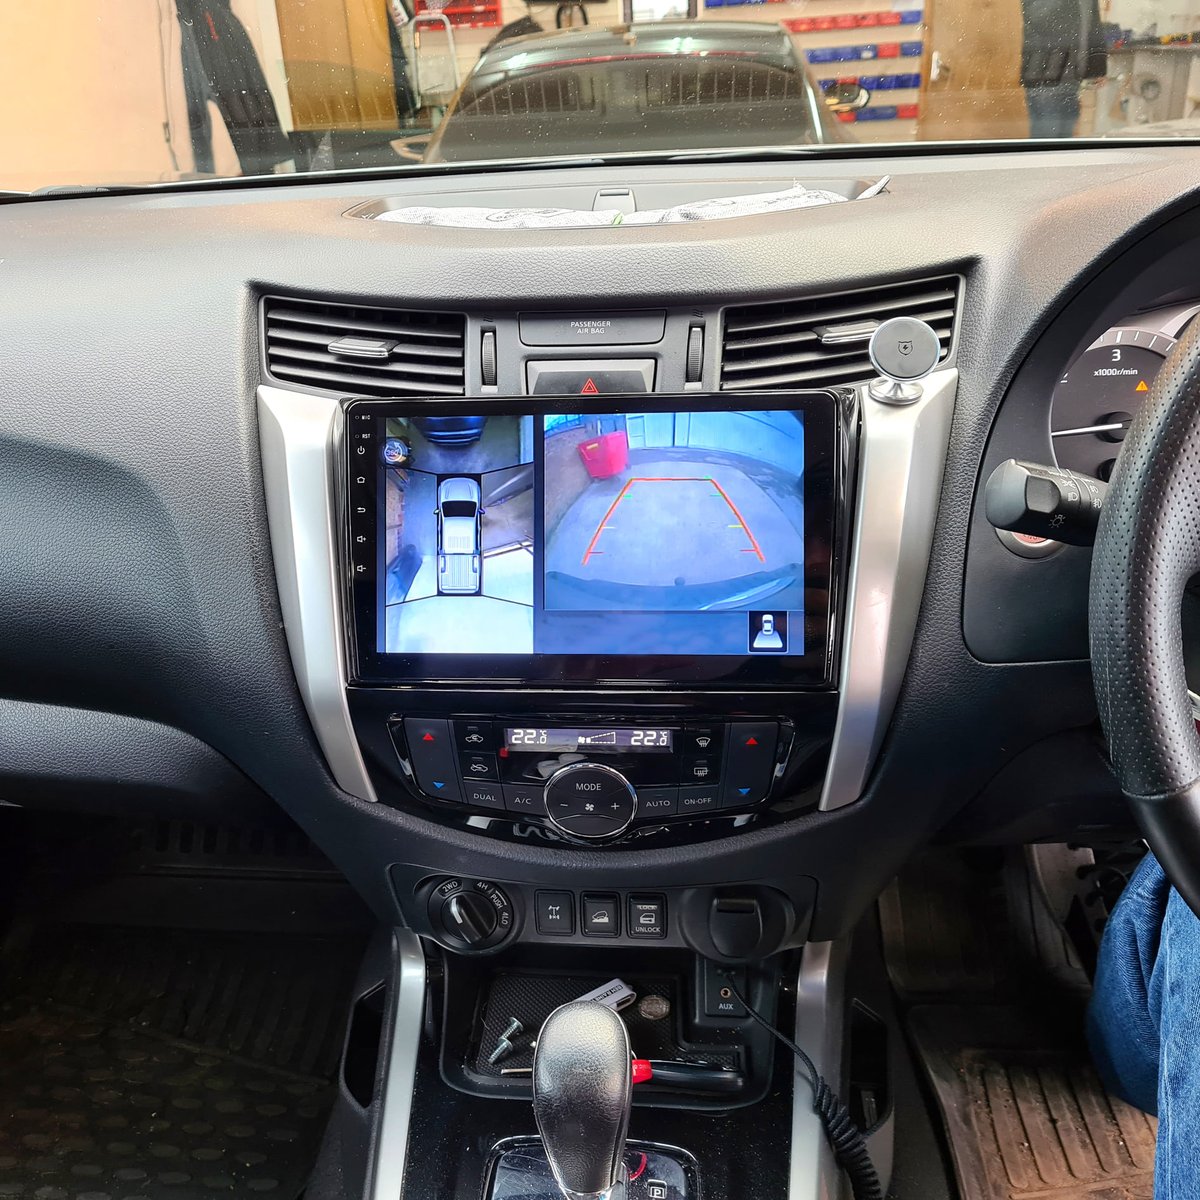 ✅ Nissan Navara 2017 Stereo Upgrade. Customer bought his own 10' unit and came to us to fit it and retain the 360 camera view he previously had.

 Call us on 020 8558 111
🌐 Visit us on incarmusic.co.uk
📍 Find us on Leyton, London E10 6RF

#audioupgrade #carspeakers